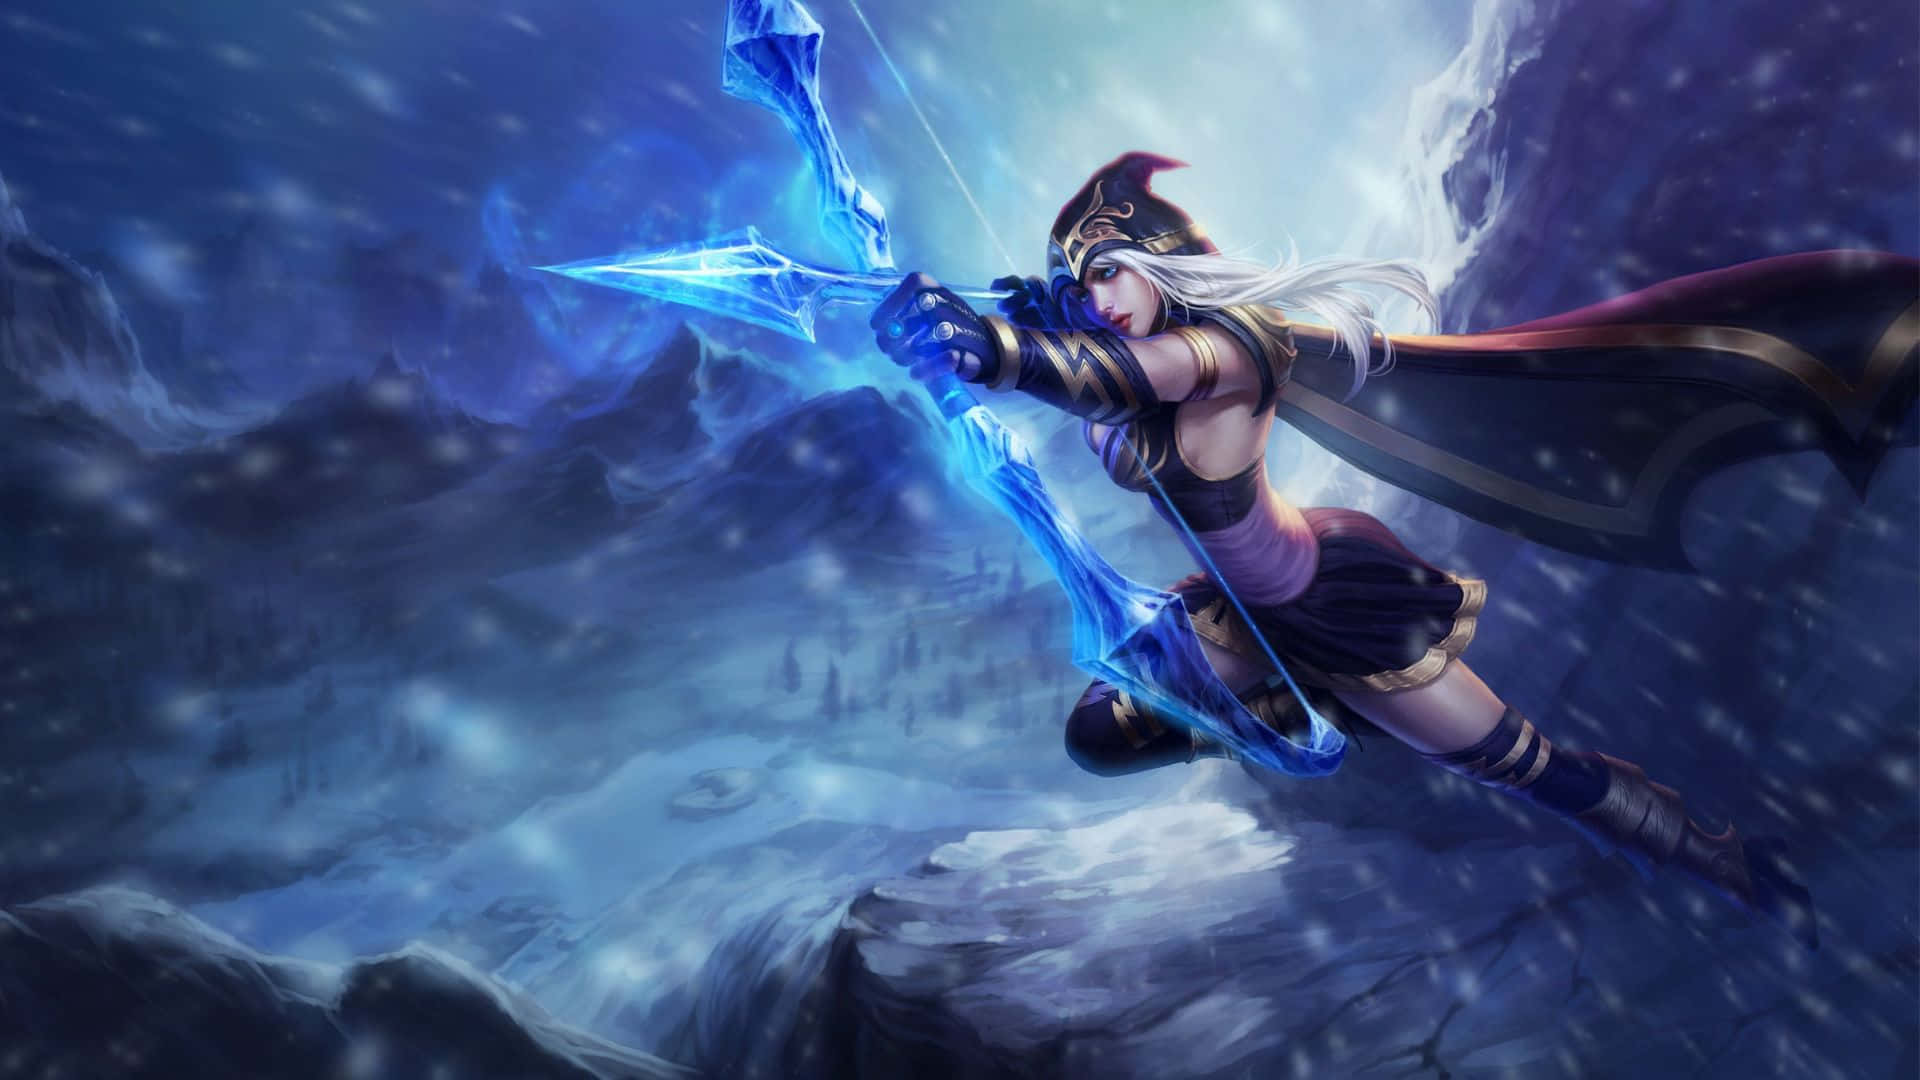 Join your allies in the fantastical world of League of Legends